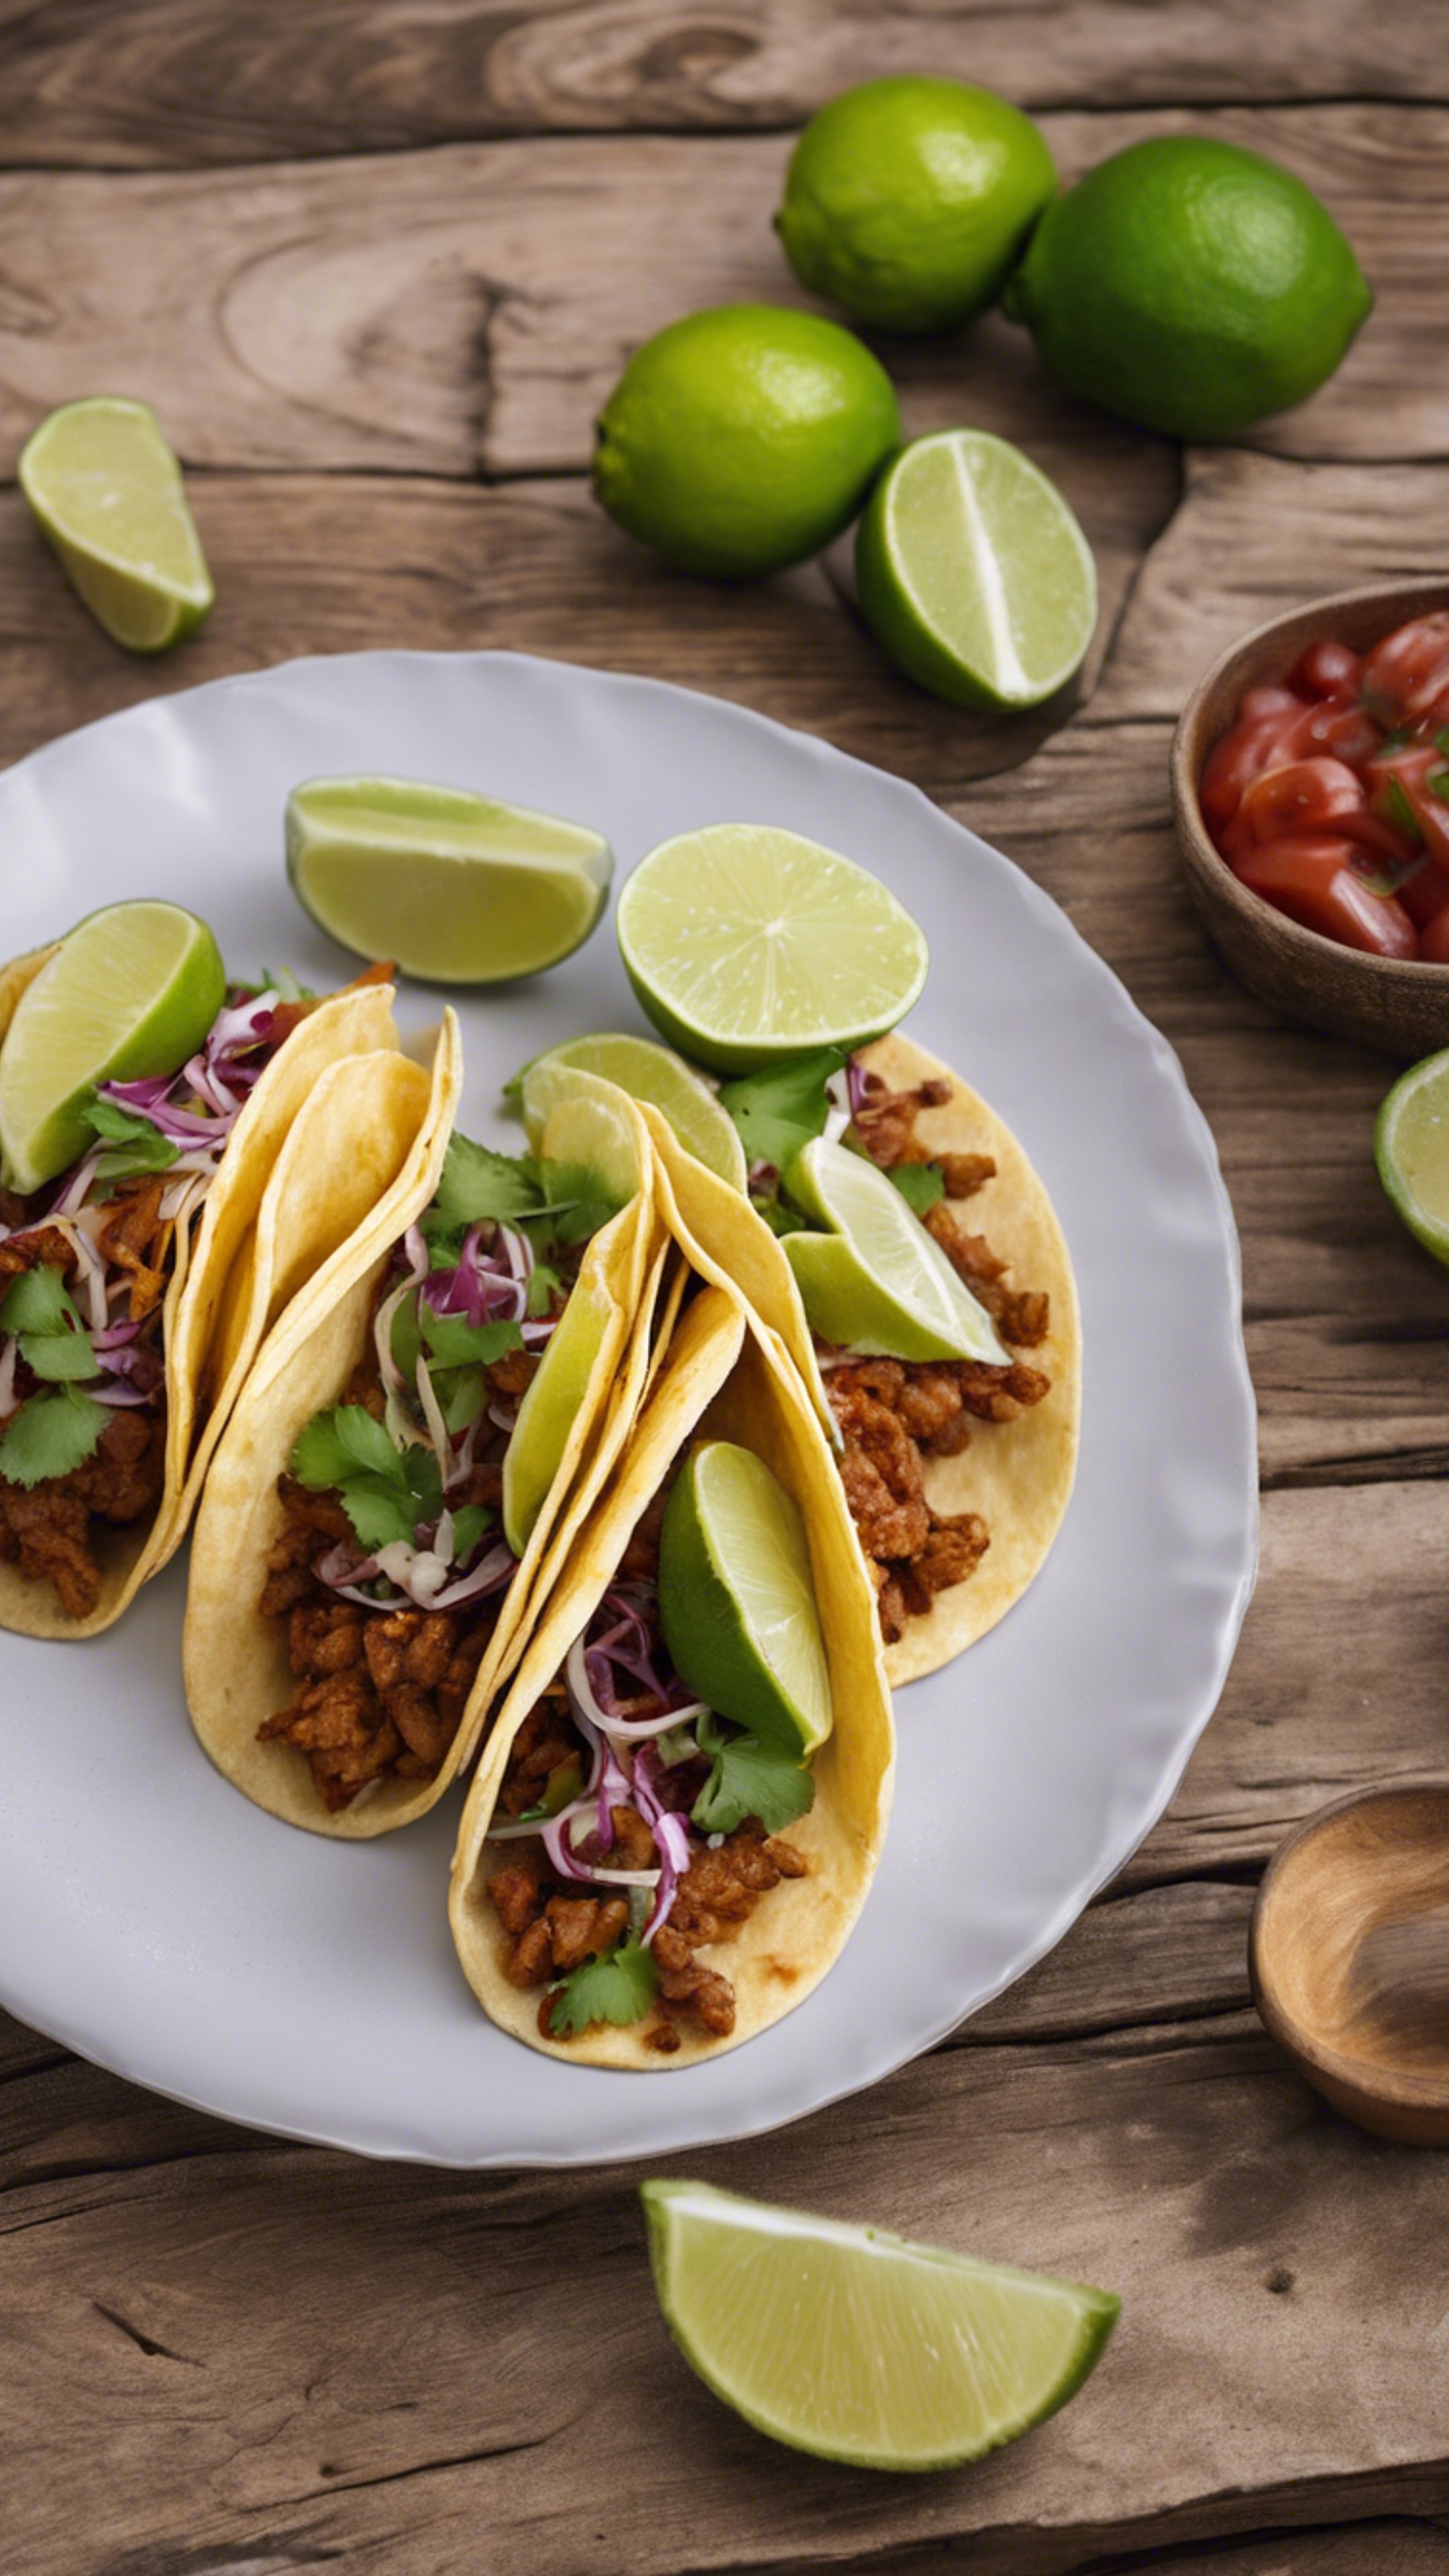 A plate of tacos garnished with fresh lime wedges on a rustic wooden table. 벽지[5f6c6b777f9c4d0caf3c]